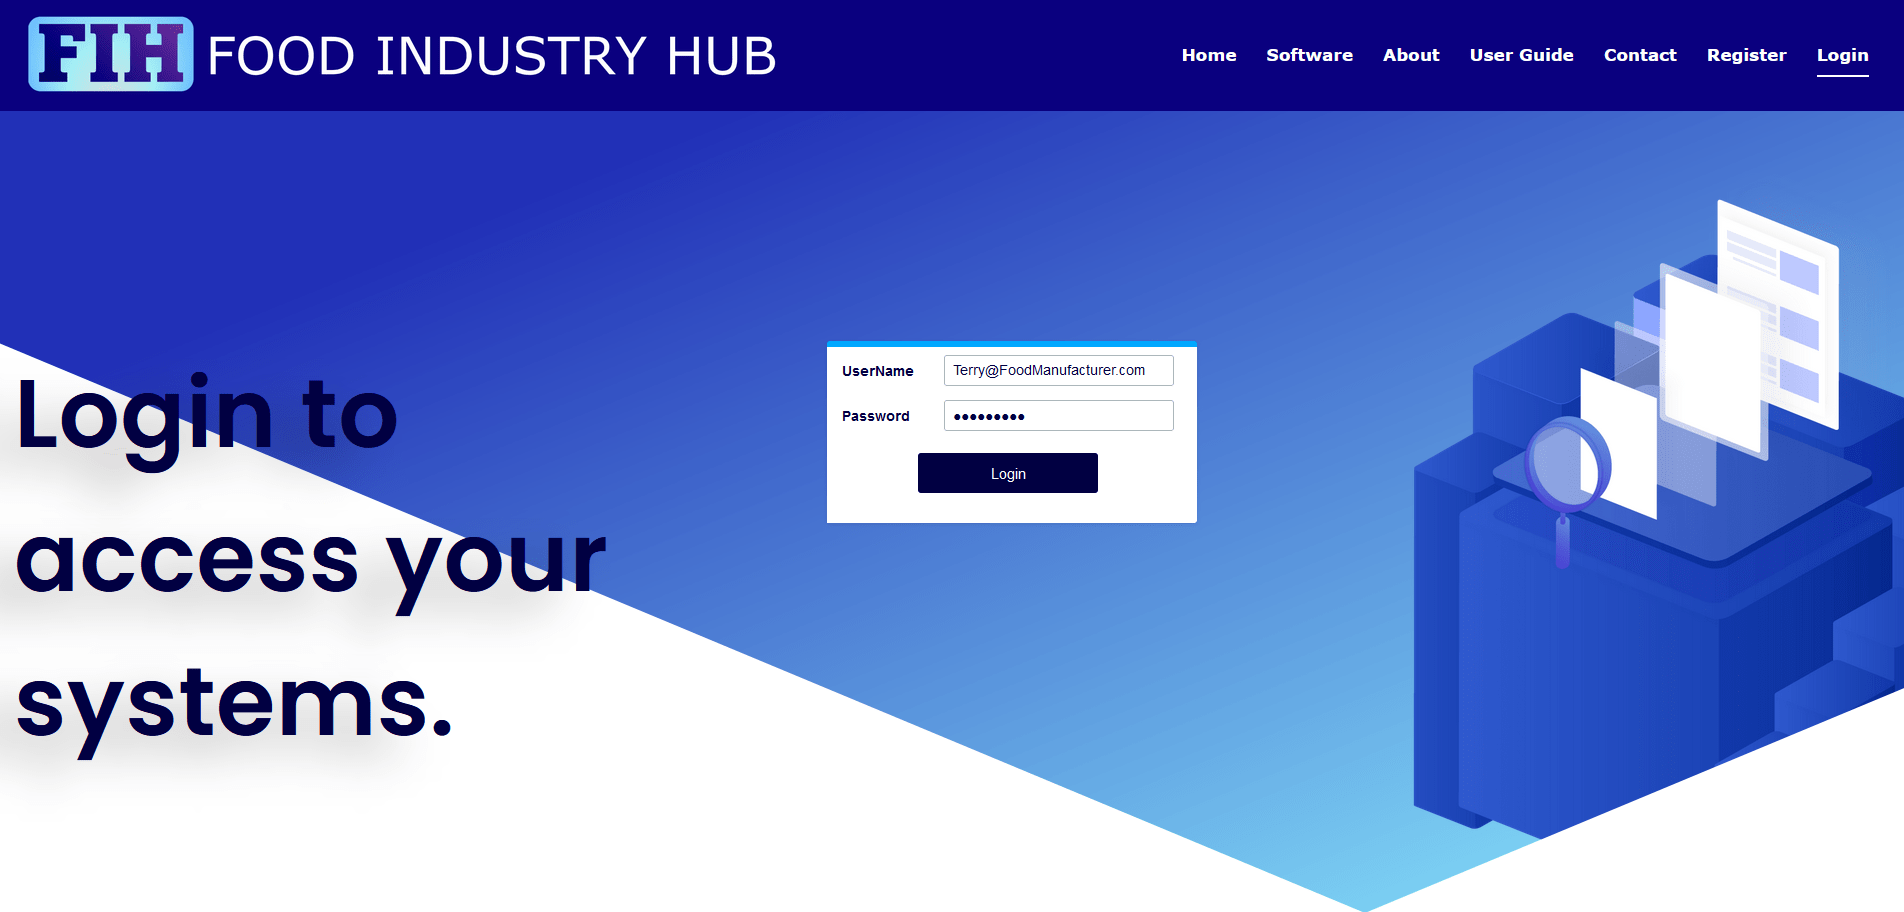 Login to access your systems